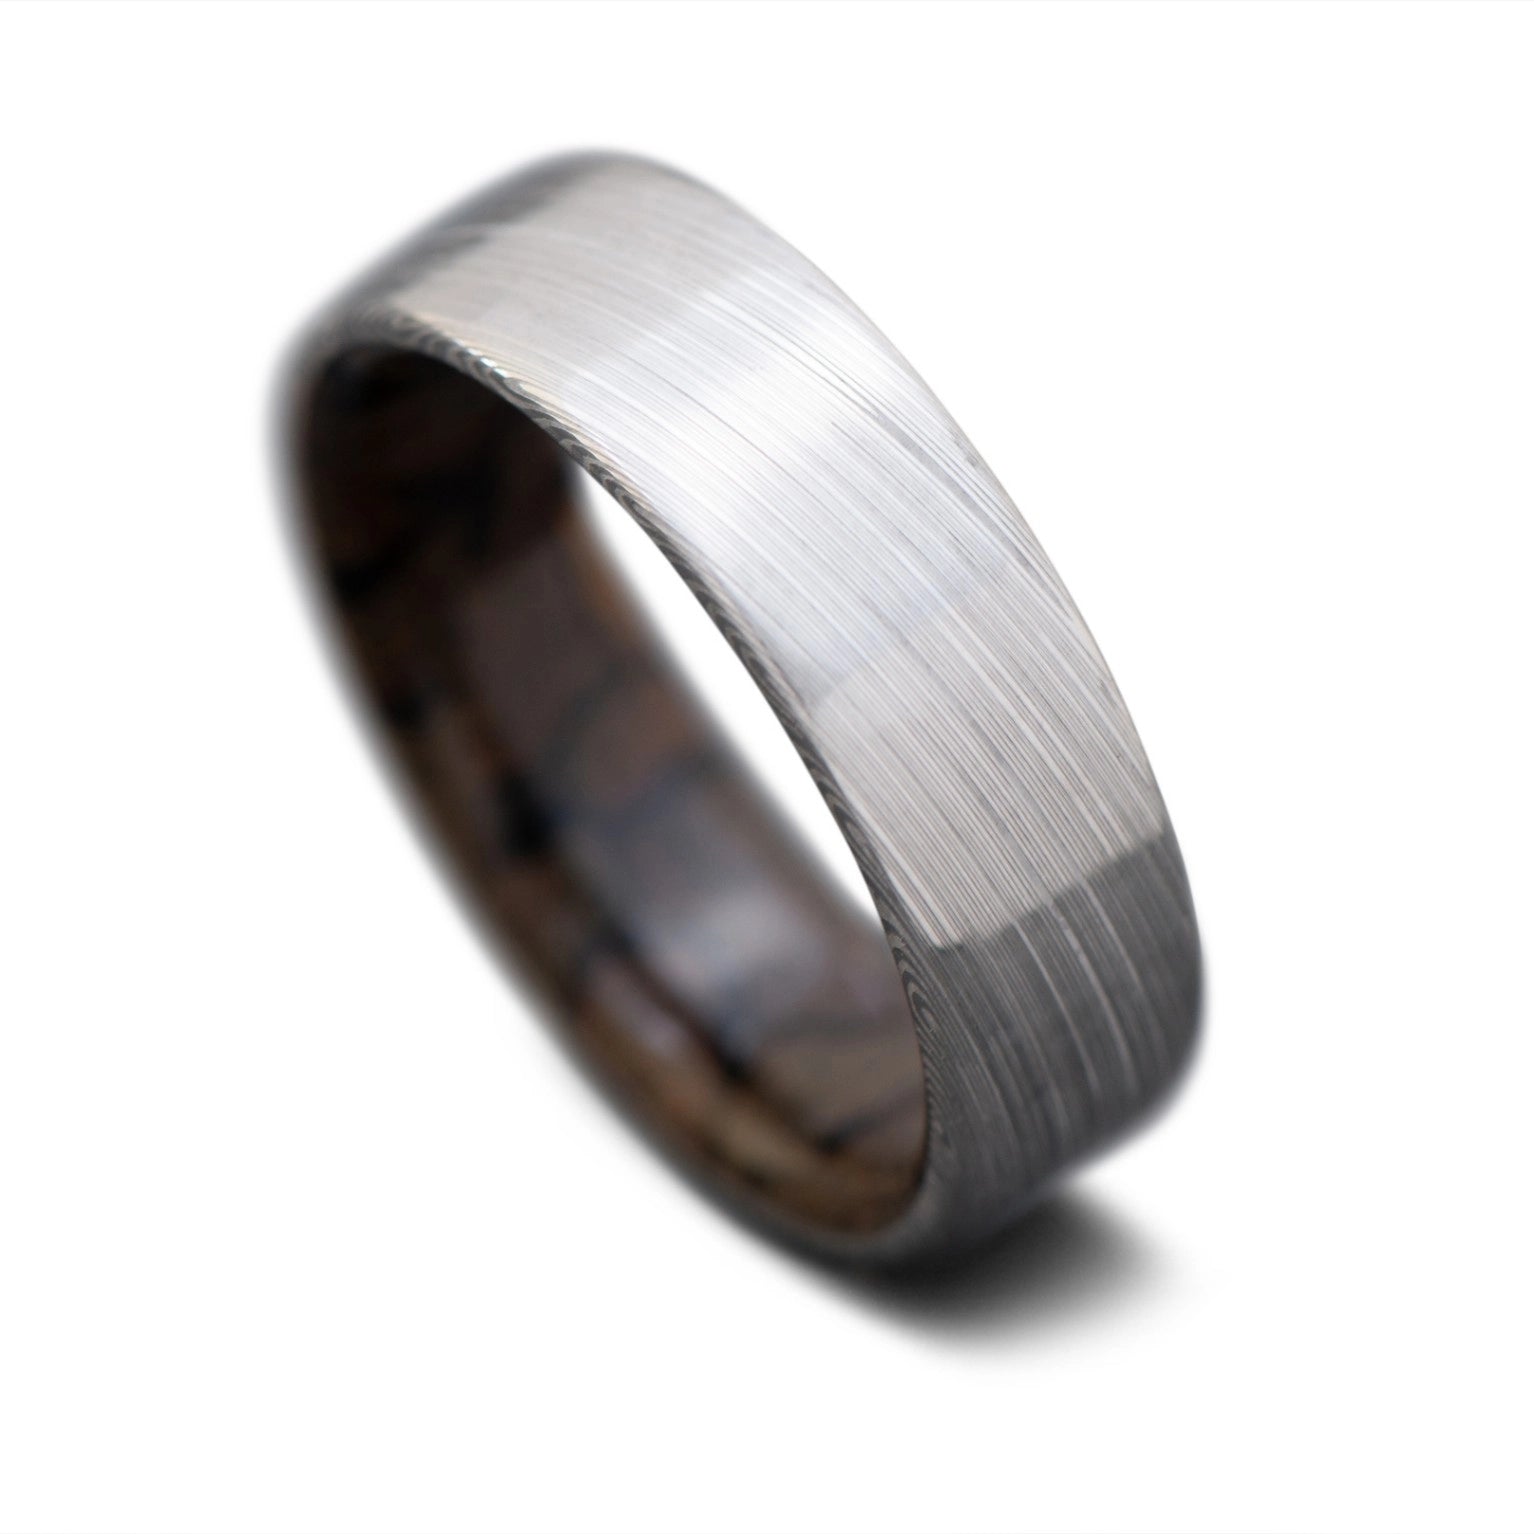 Heimskringla Core Ring with T-Rex Inner Sleeve, 7mm -THE LEGEND